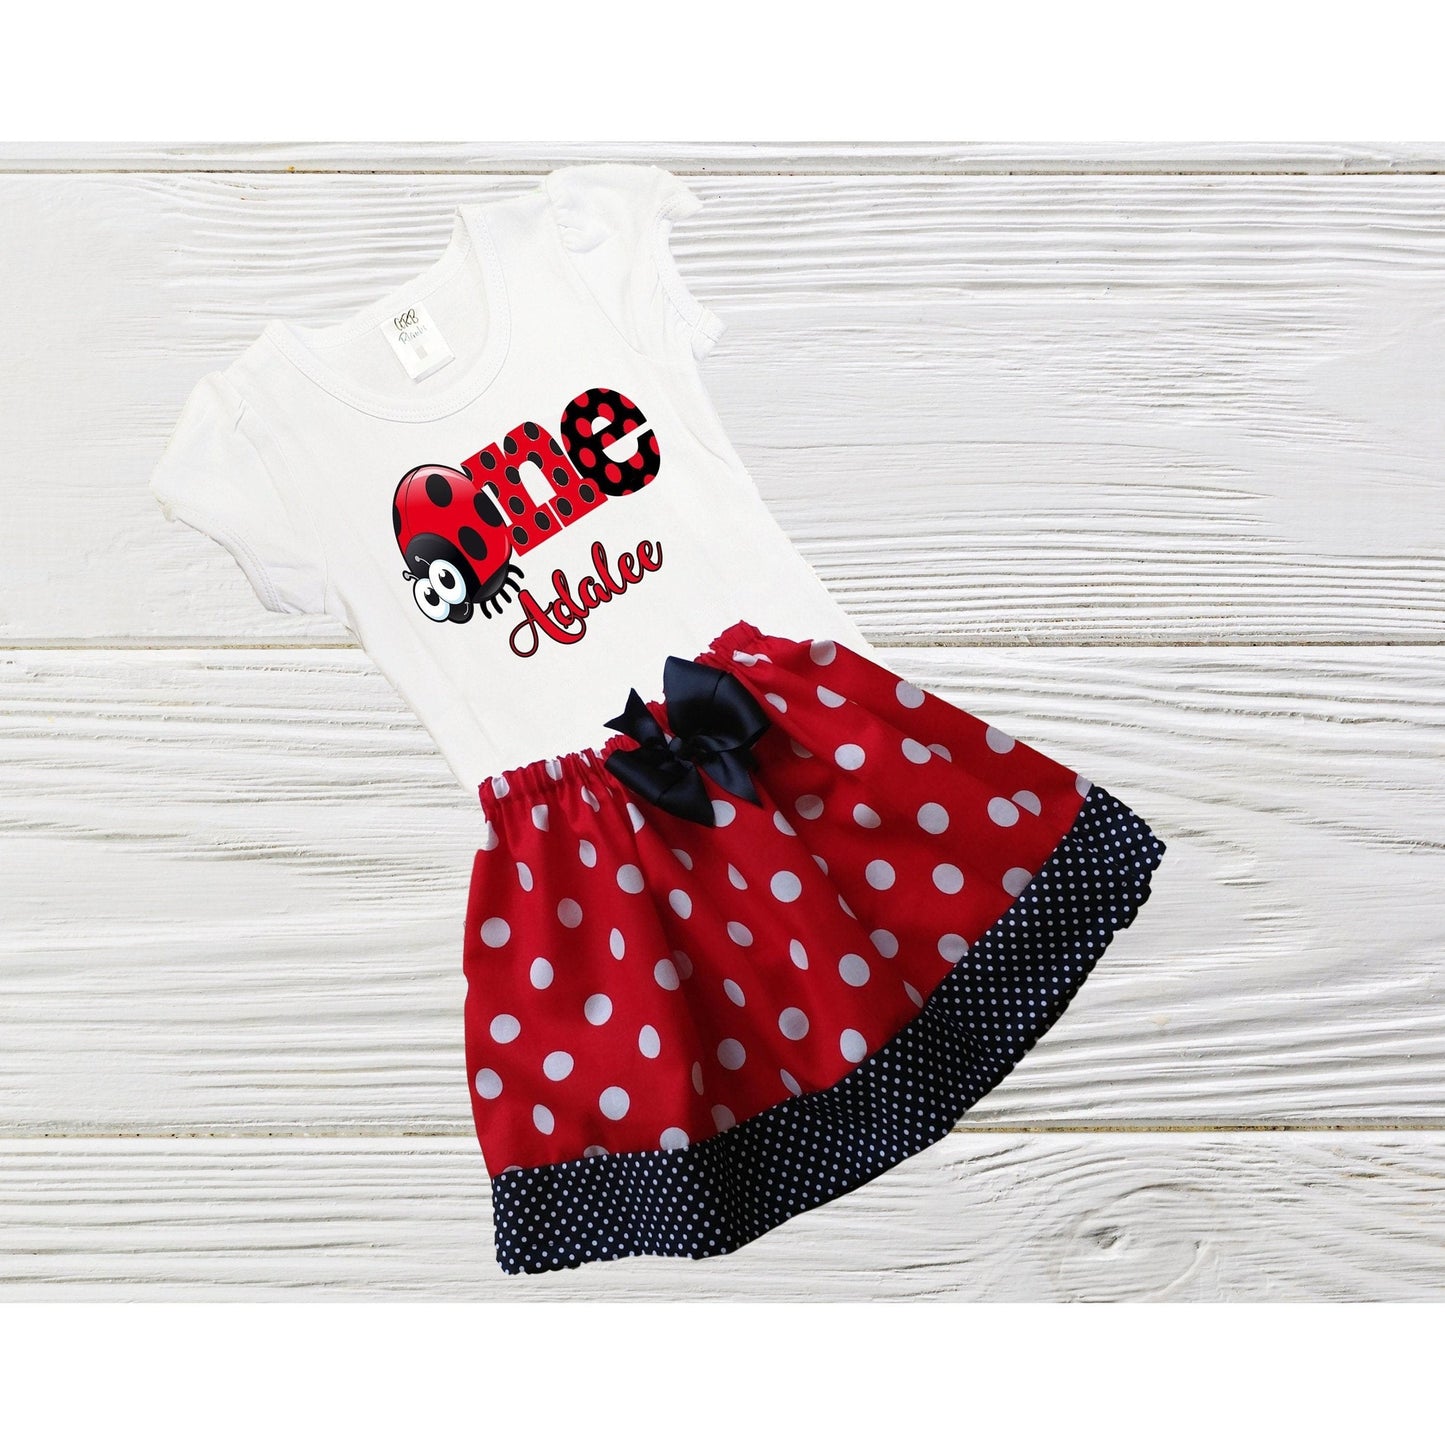 Lady bug outfit